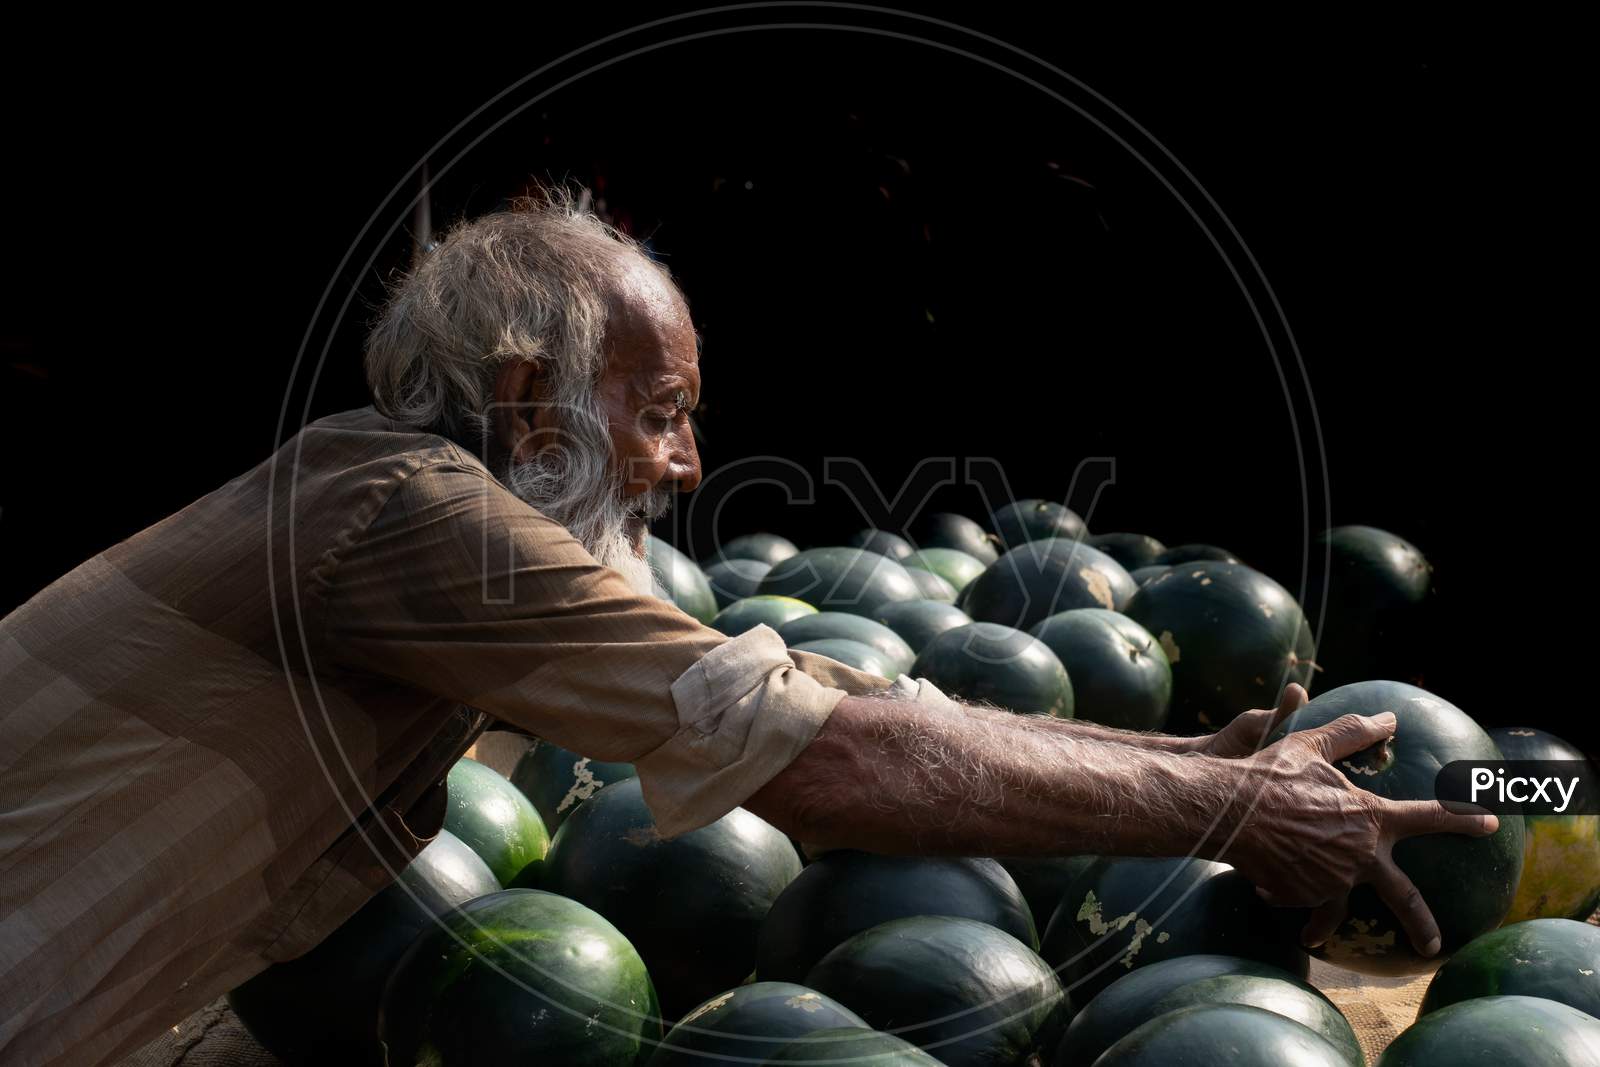 Watermelon Sellers Old Man At A Market In India .